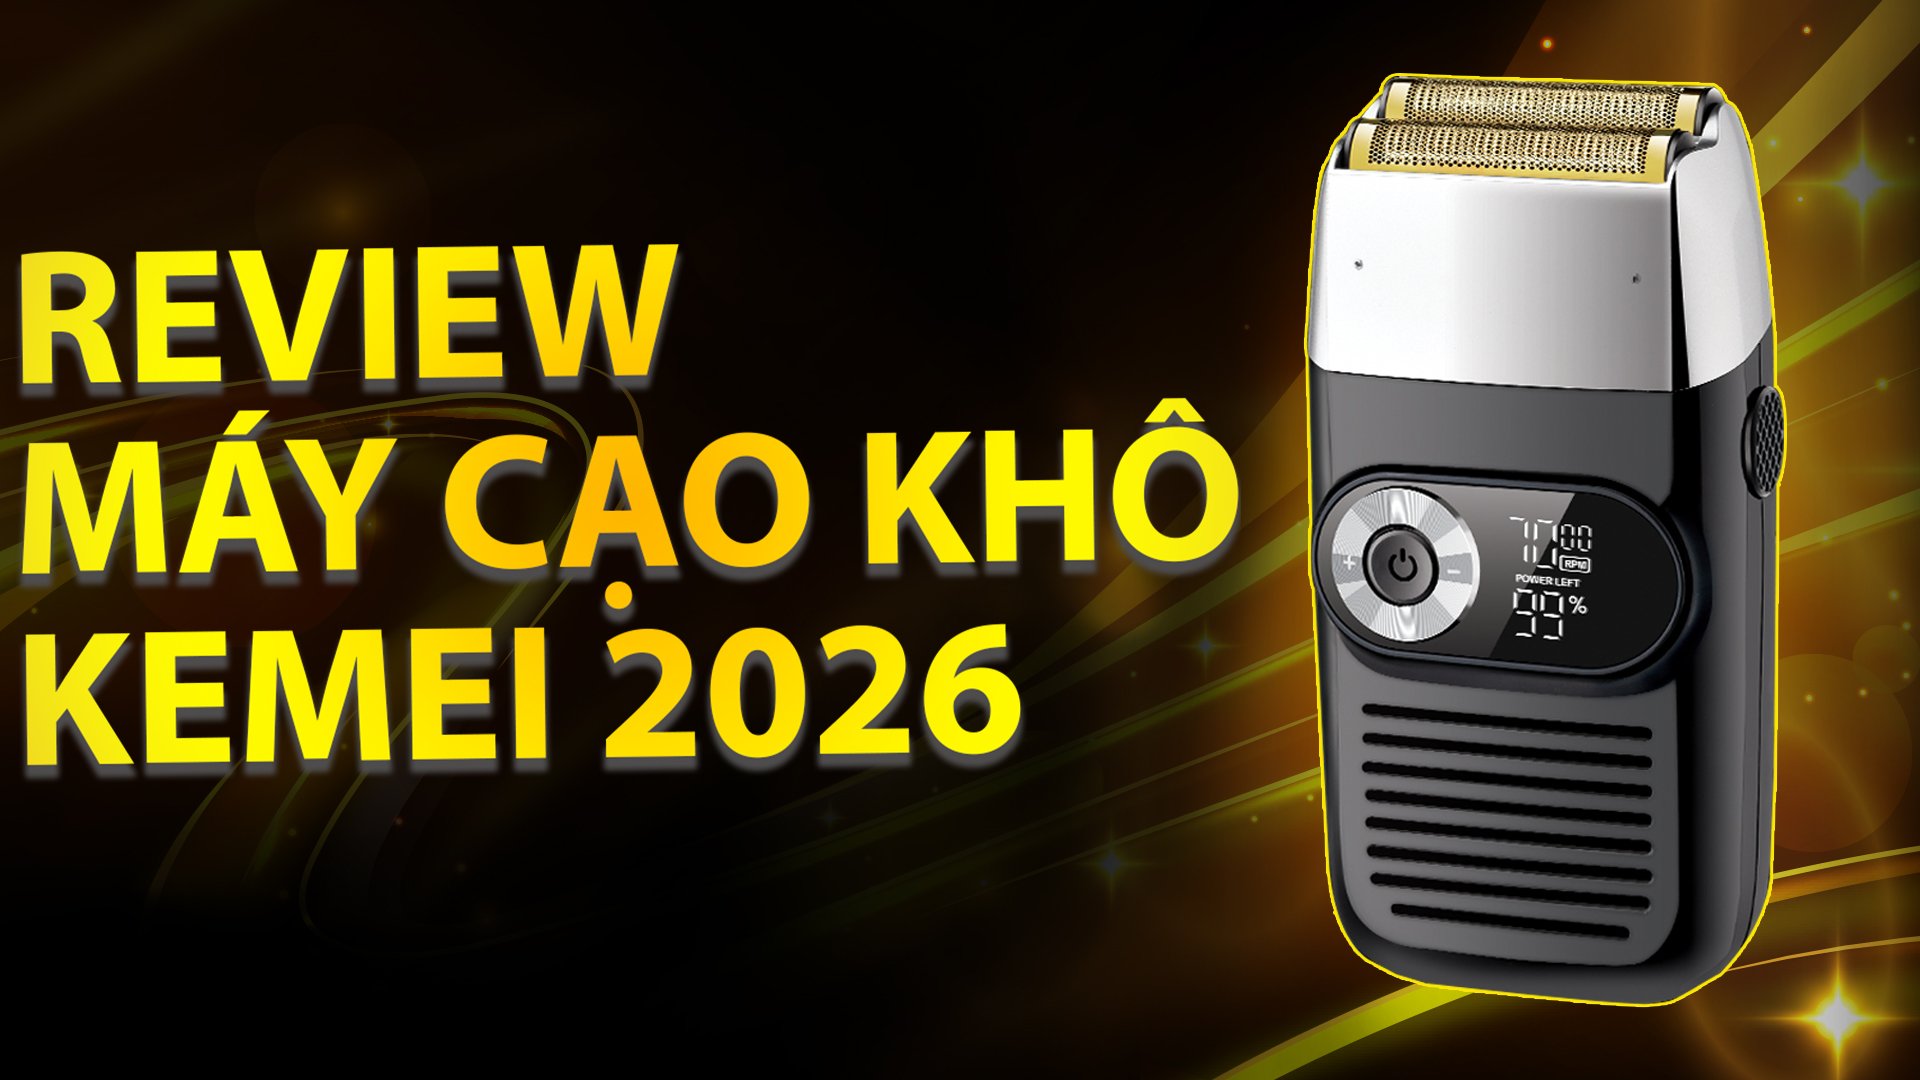 review may cao kho kemei 2026